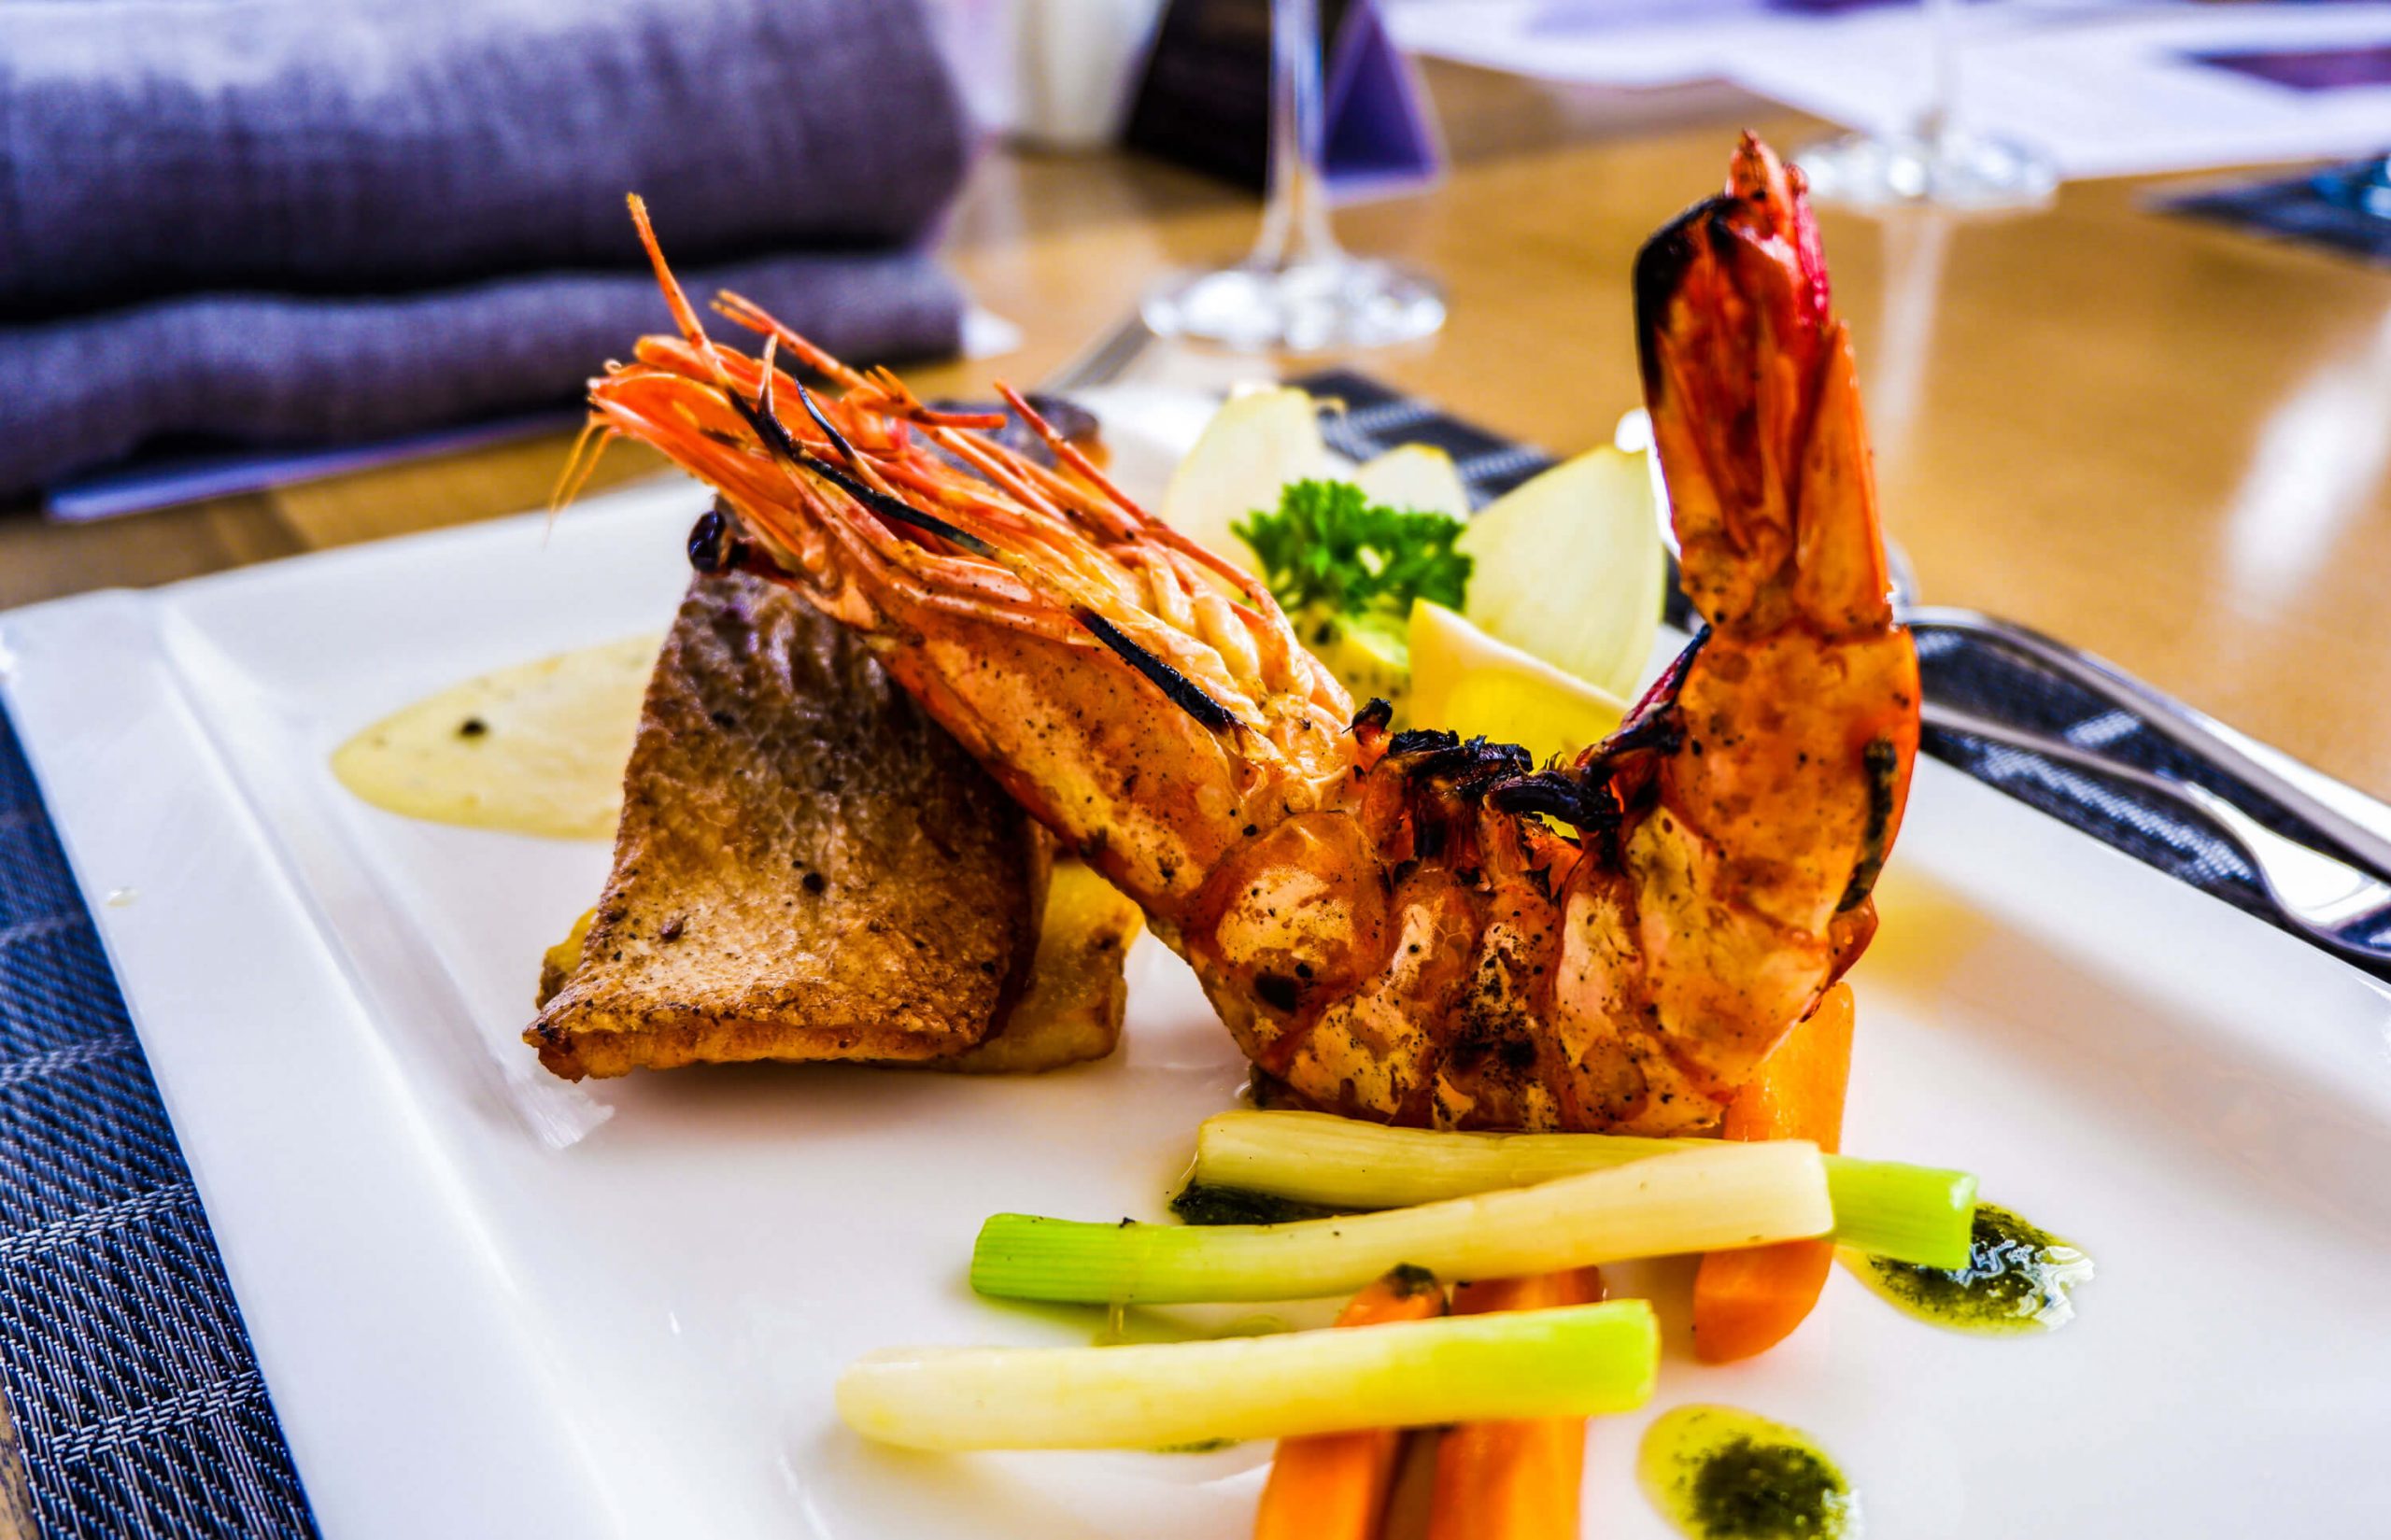 THE LOVE BOAT. Pan seared salmon and prawn combination served with herbed butter and lemon garlic sauce.